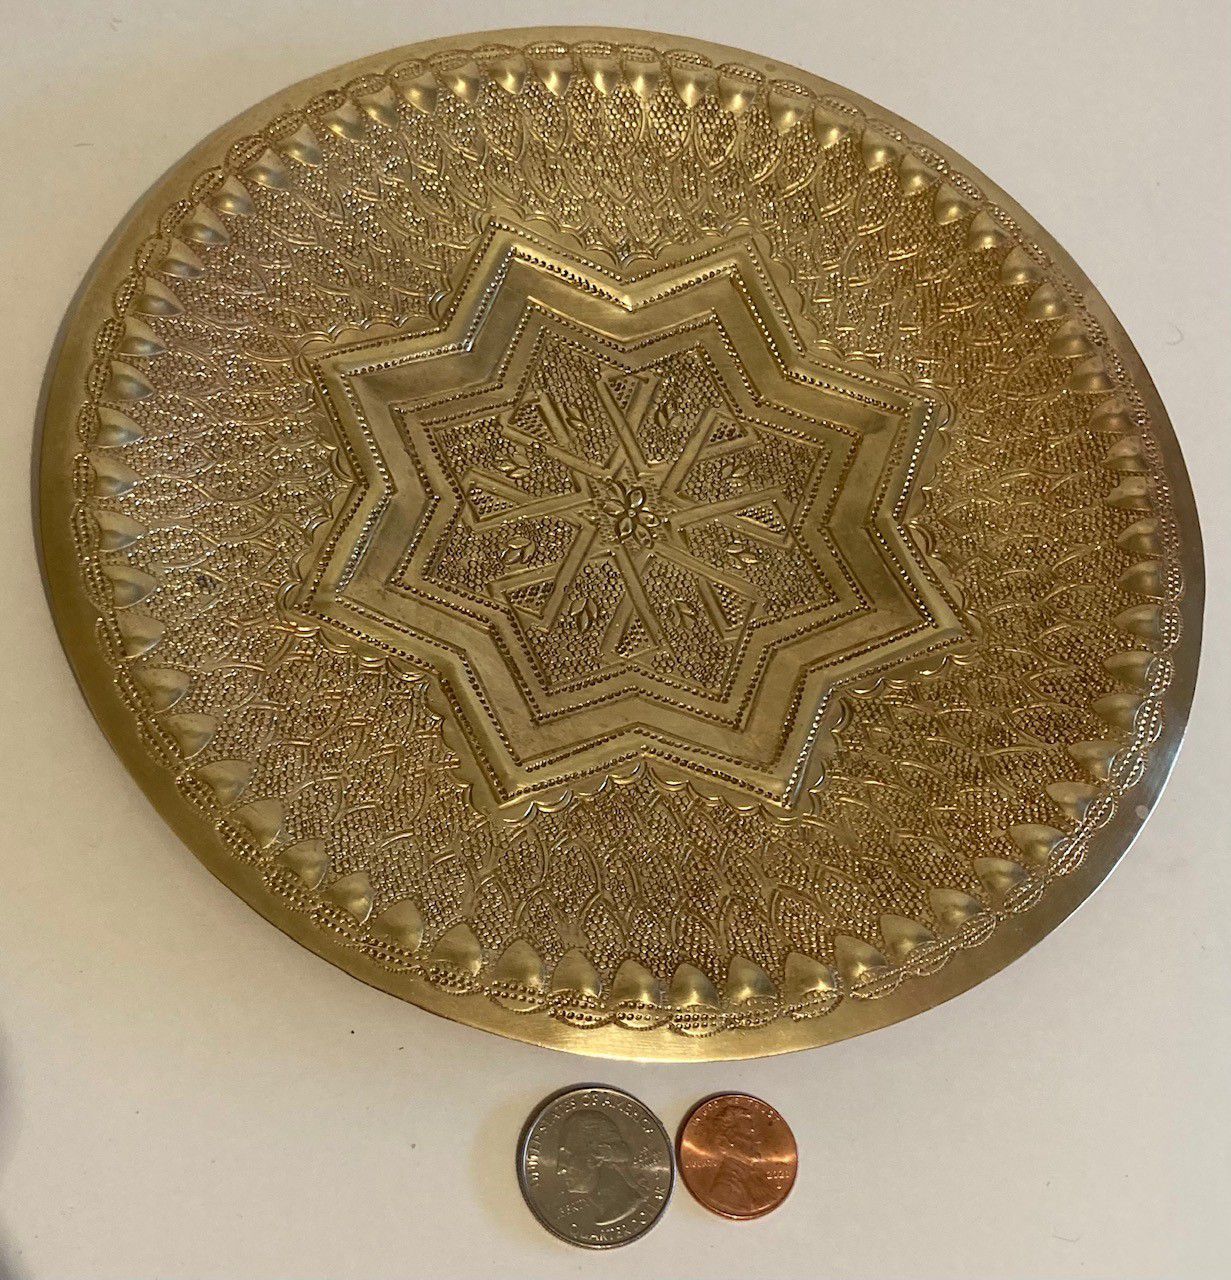 Vintage Metal Brass Plate, Wall Hanging, Religious, Intricate Design, 8" Wide, Wall Decor, Table Display, Shelf Display